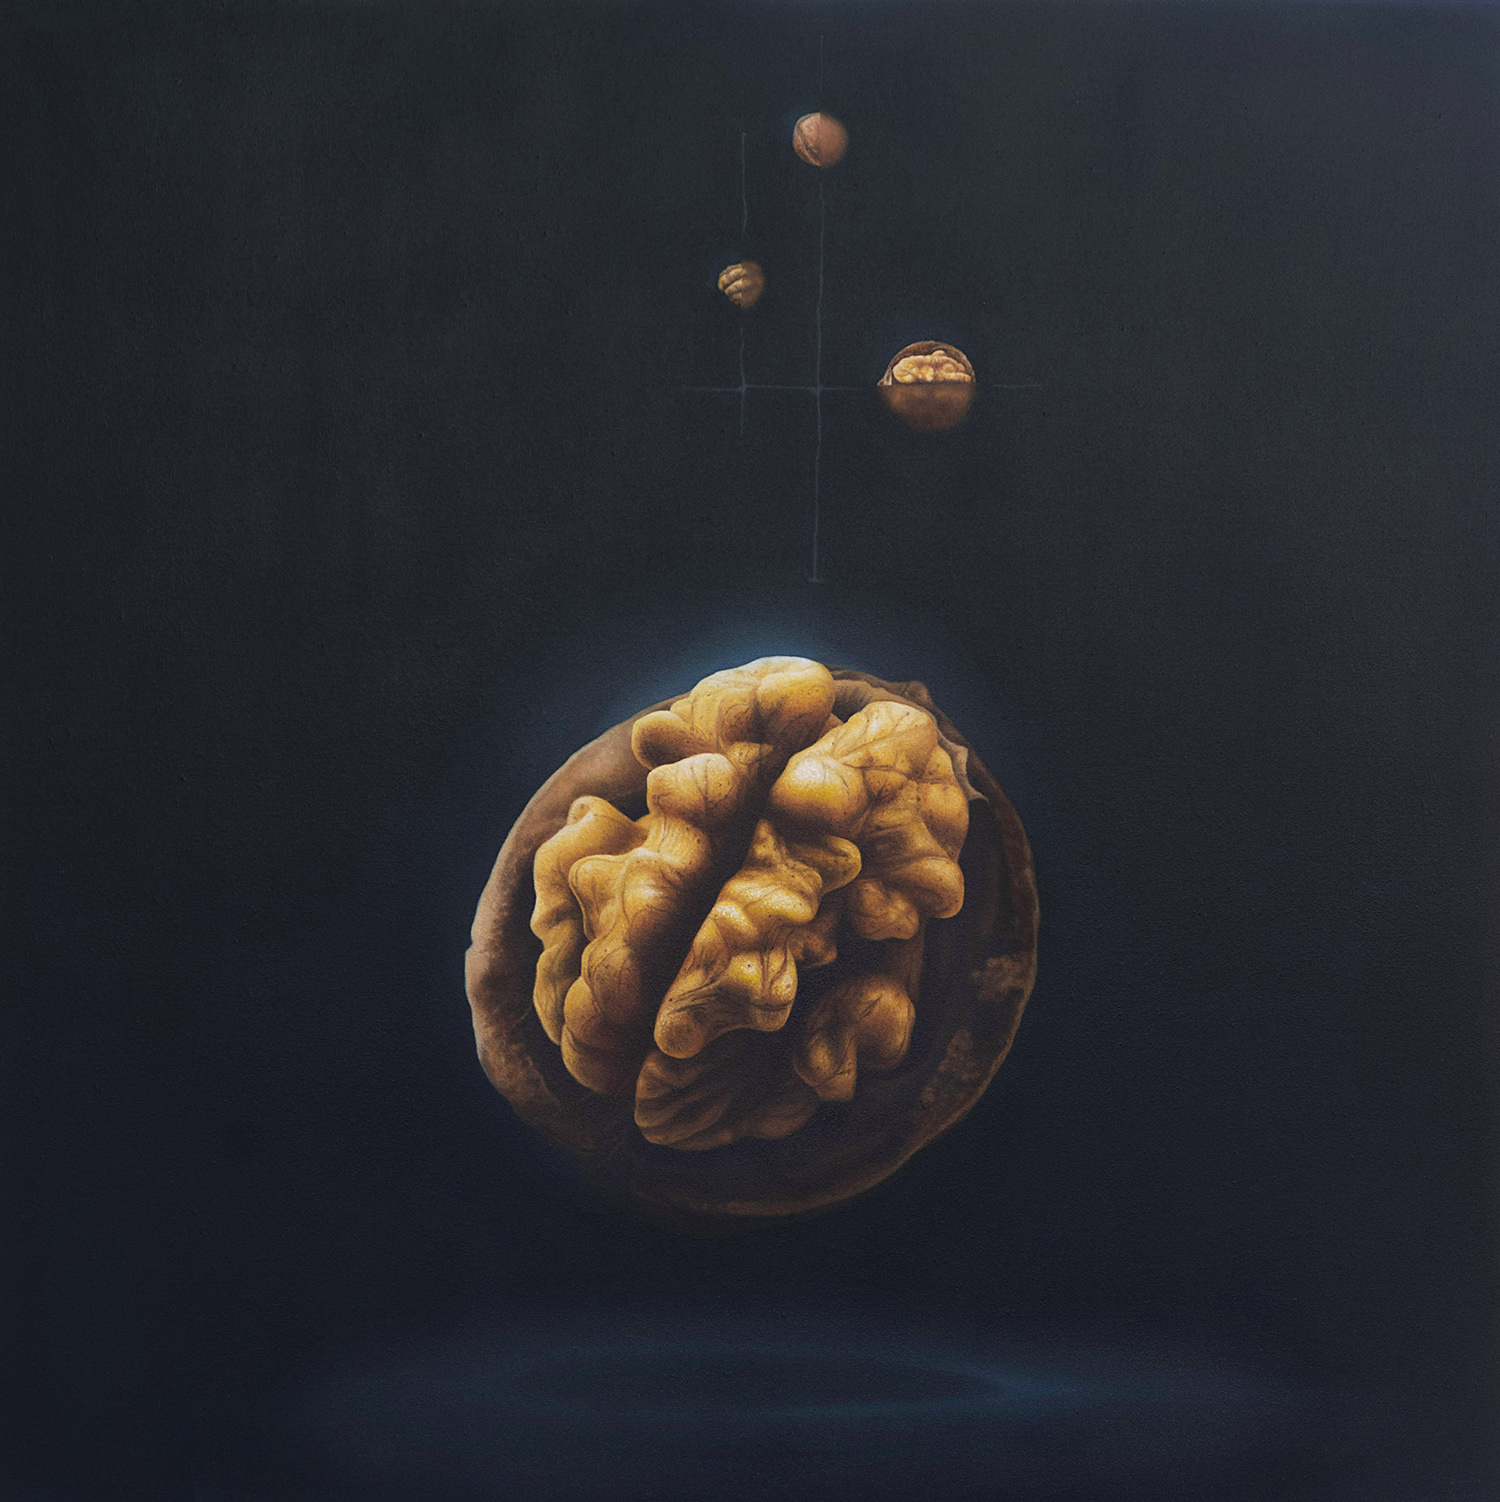 The origin of thought 3 | Oil on canvas | 100 x 100 cm